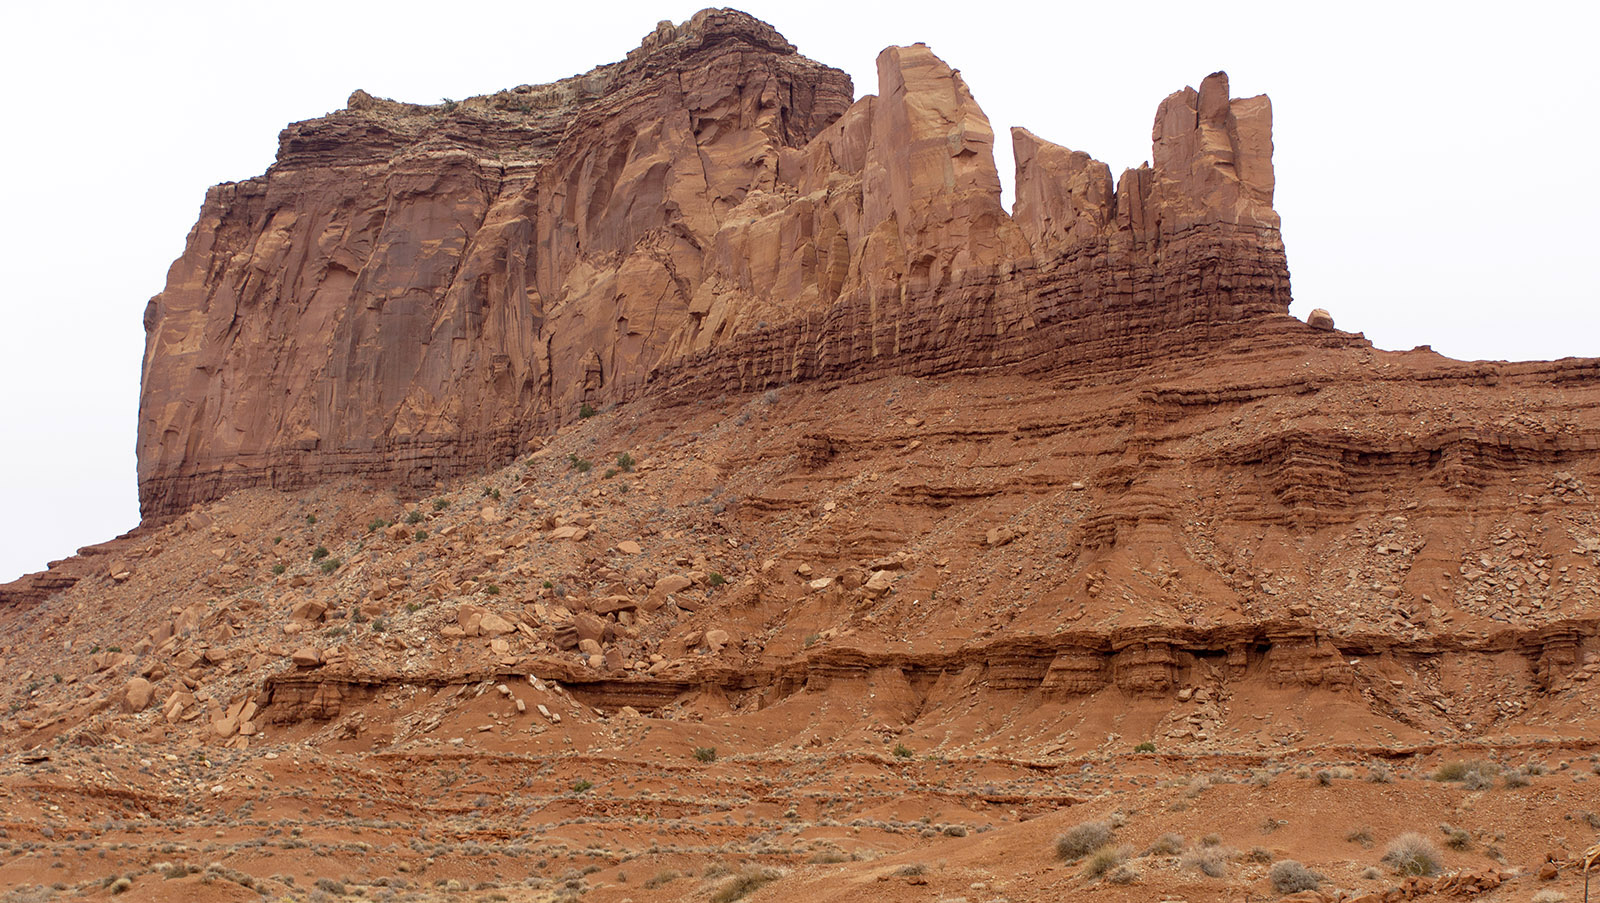 Detail of Monument Valley formation: Base of organ rock shale from 290 million years ago (early to mid Permian), thick hard band of DeChelly sandstone (280 million years); topped by cap of conglomerate of eroded sandstone and pebble Shinarump member of the Chinle Formation (225 million years)